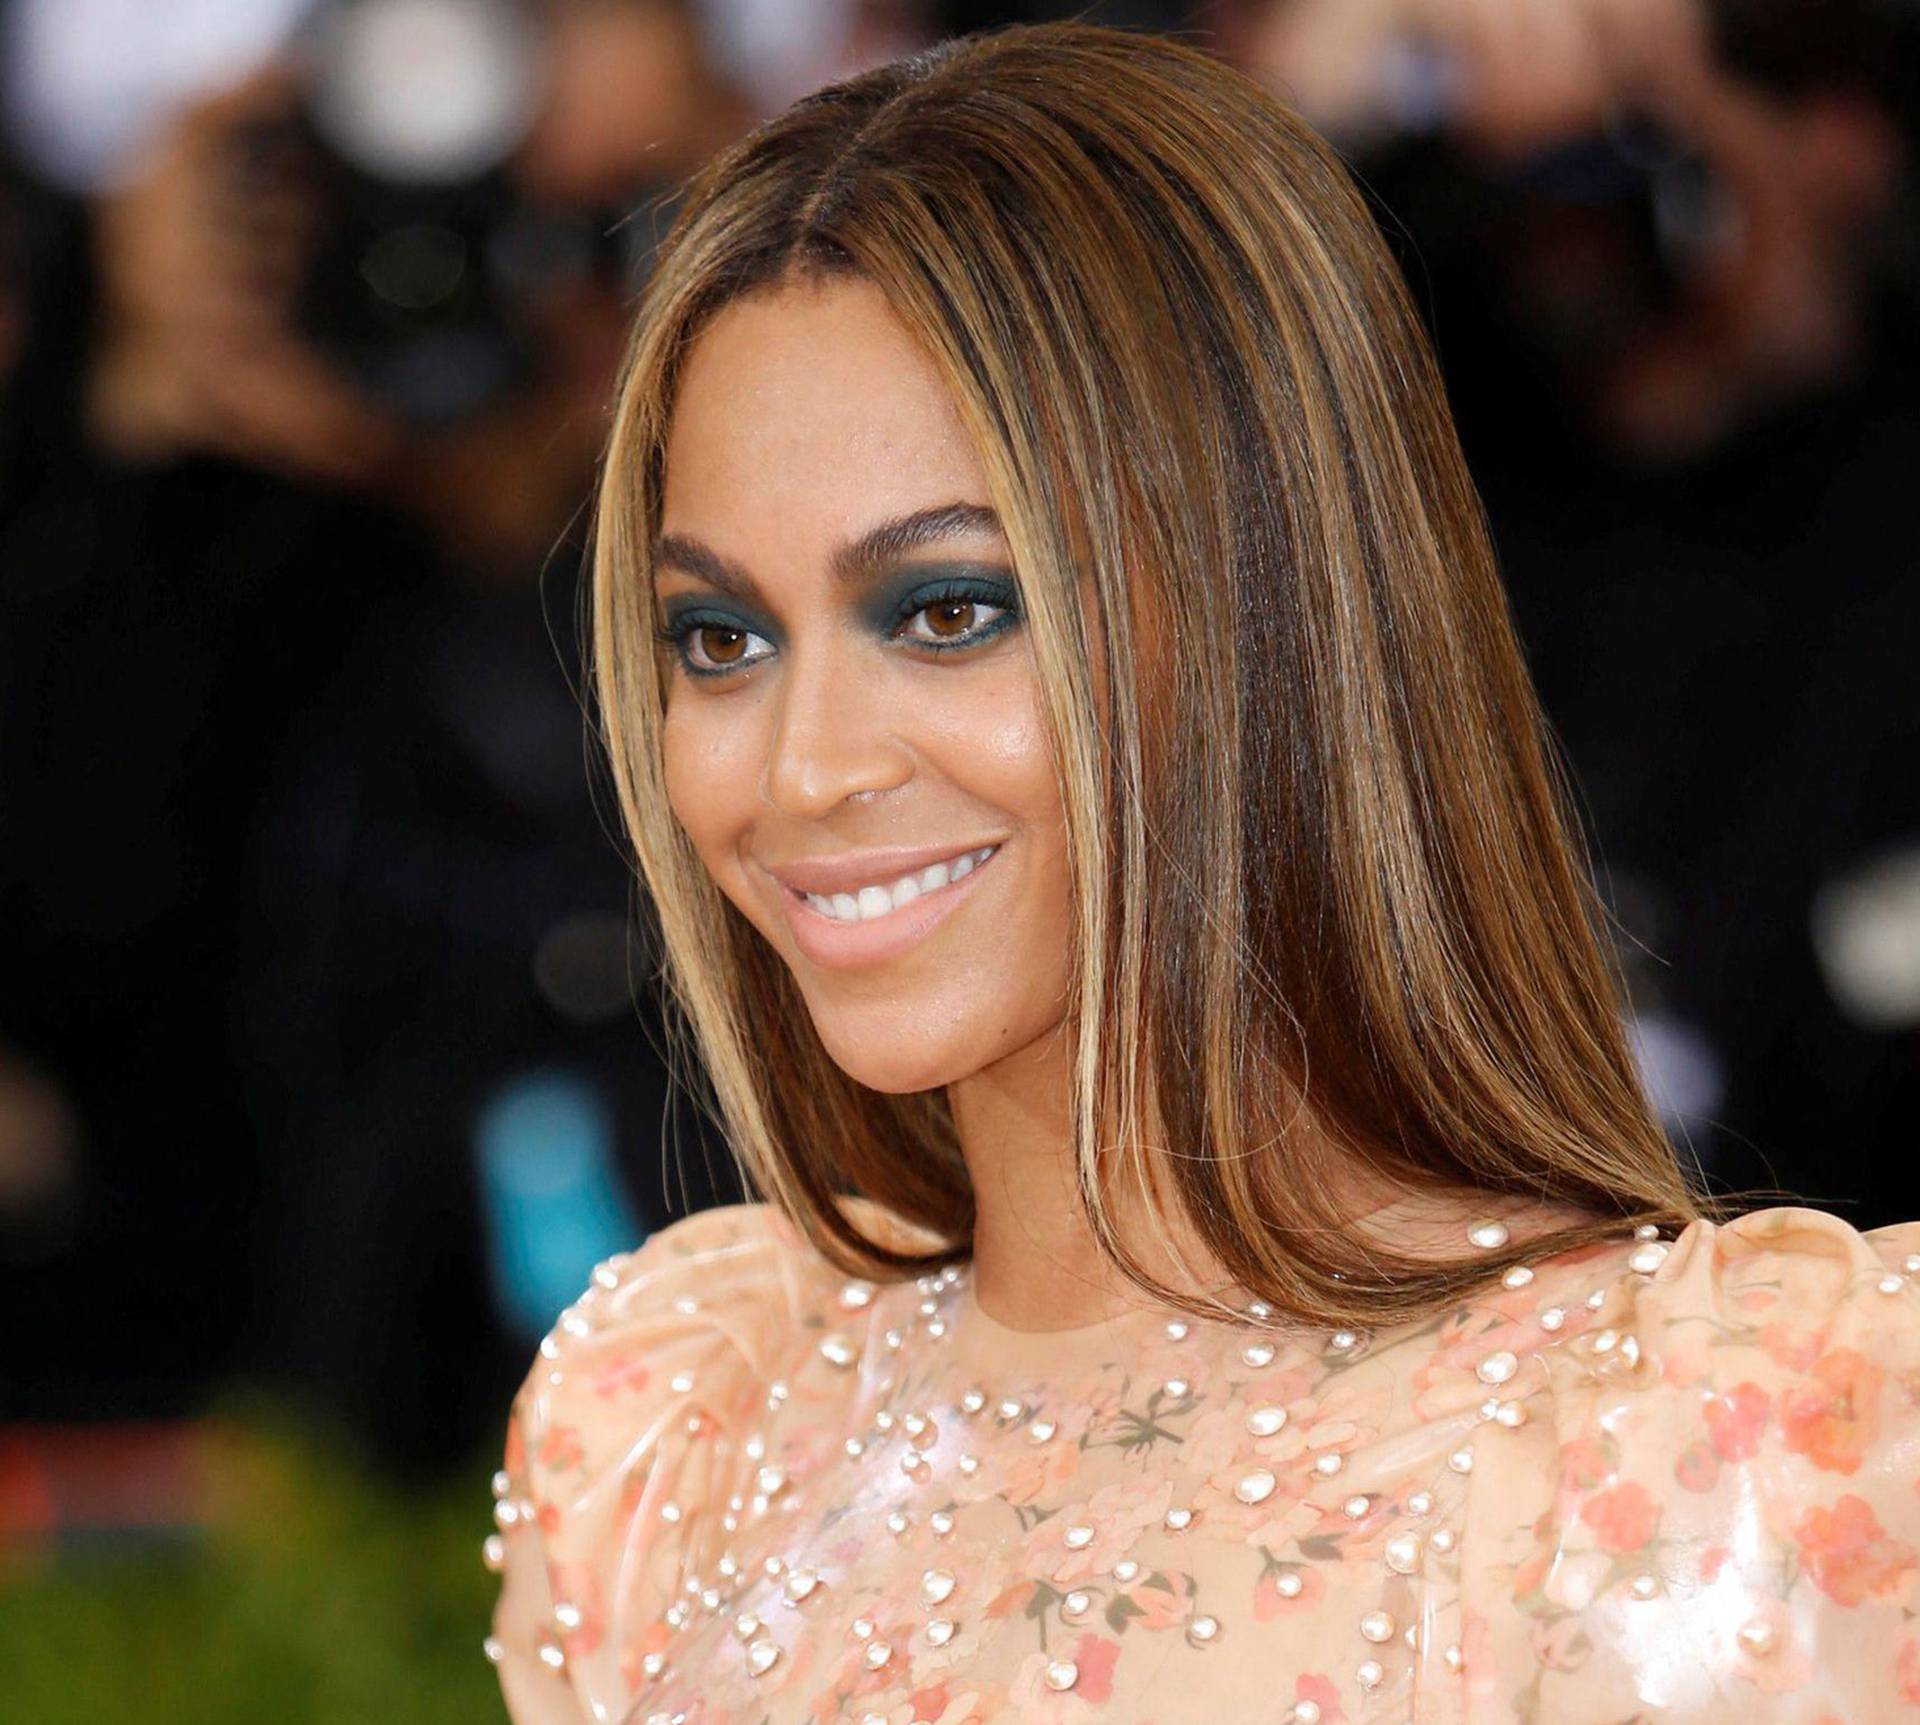 FILE PHOTO: Singer-Songwriter Beyonce Knowles arrives at the Met Gala in New York